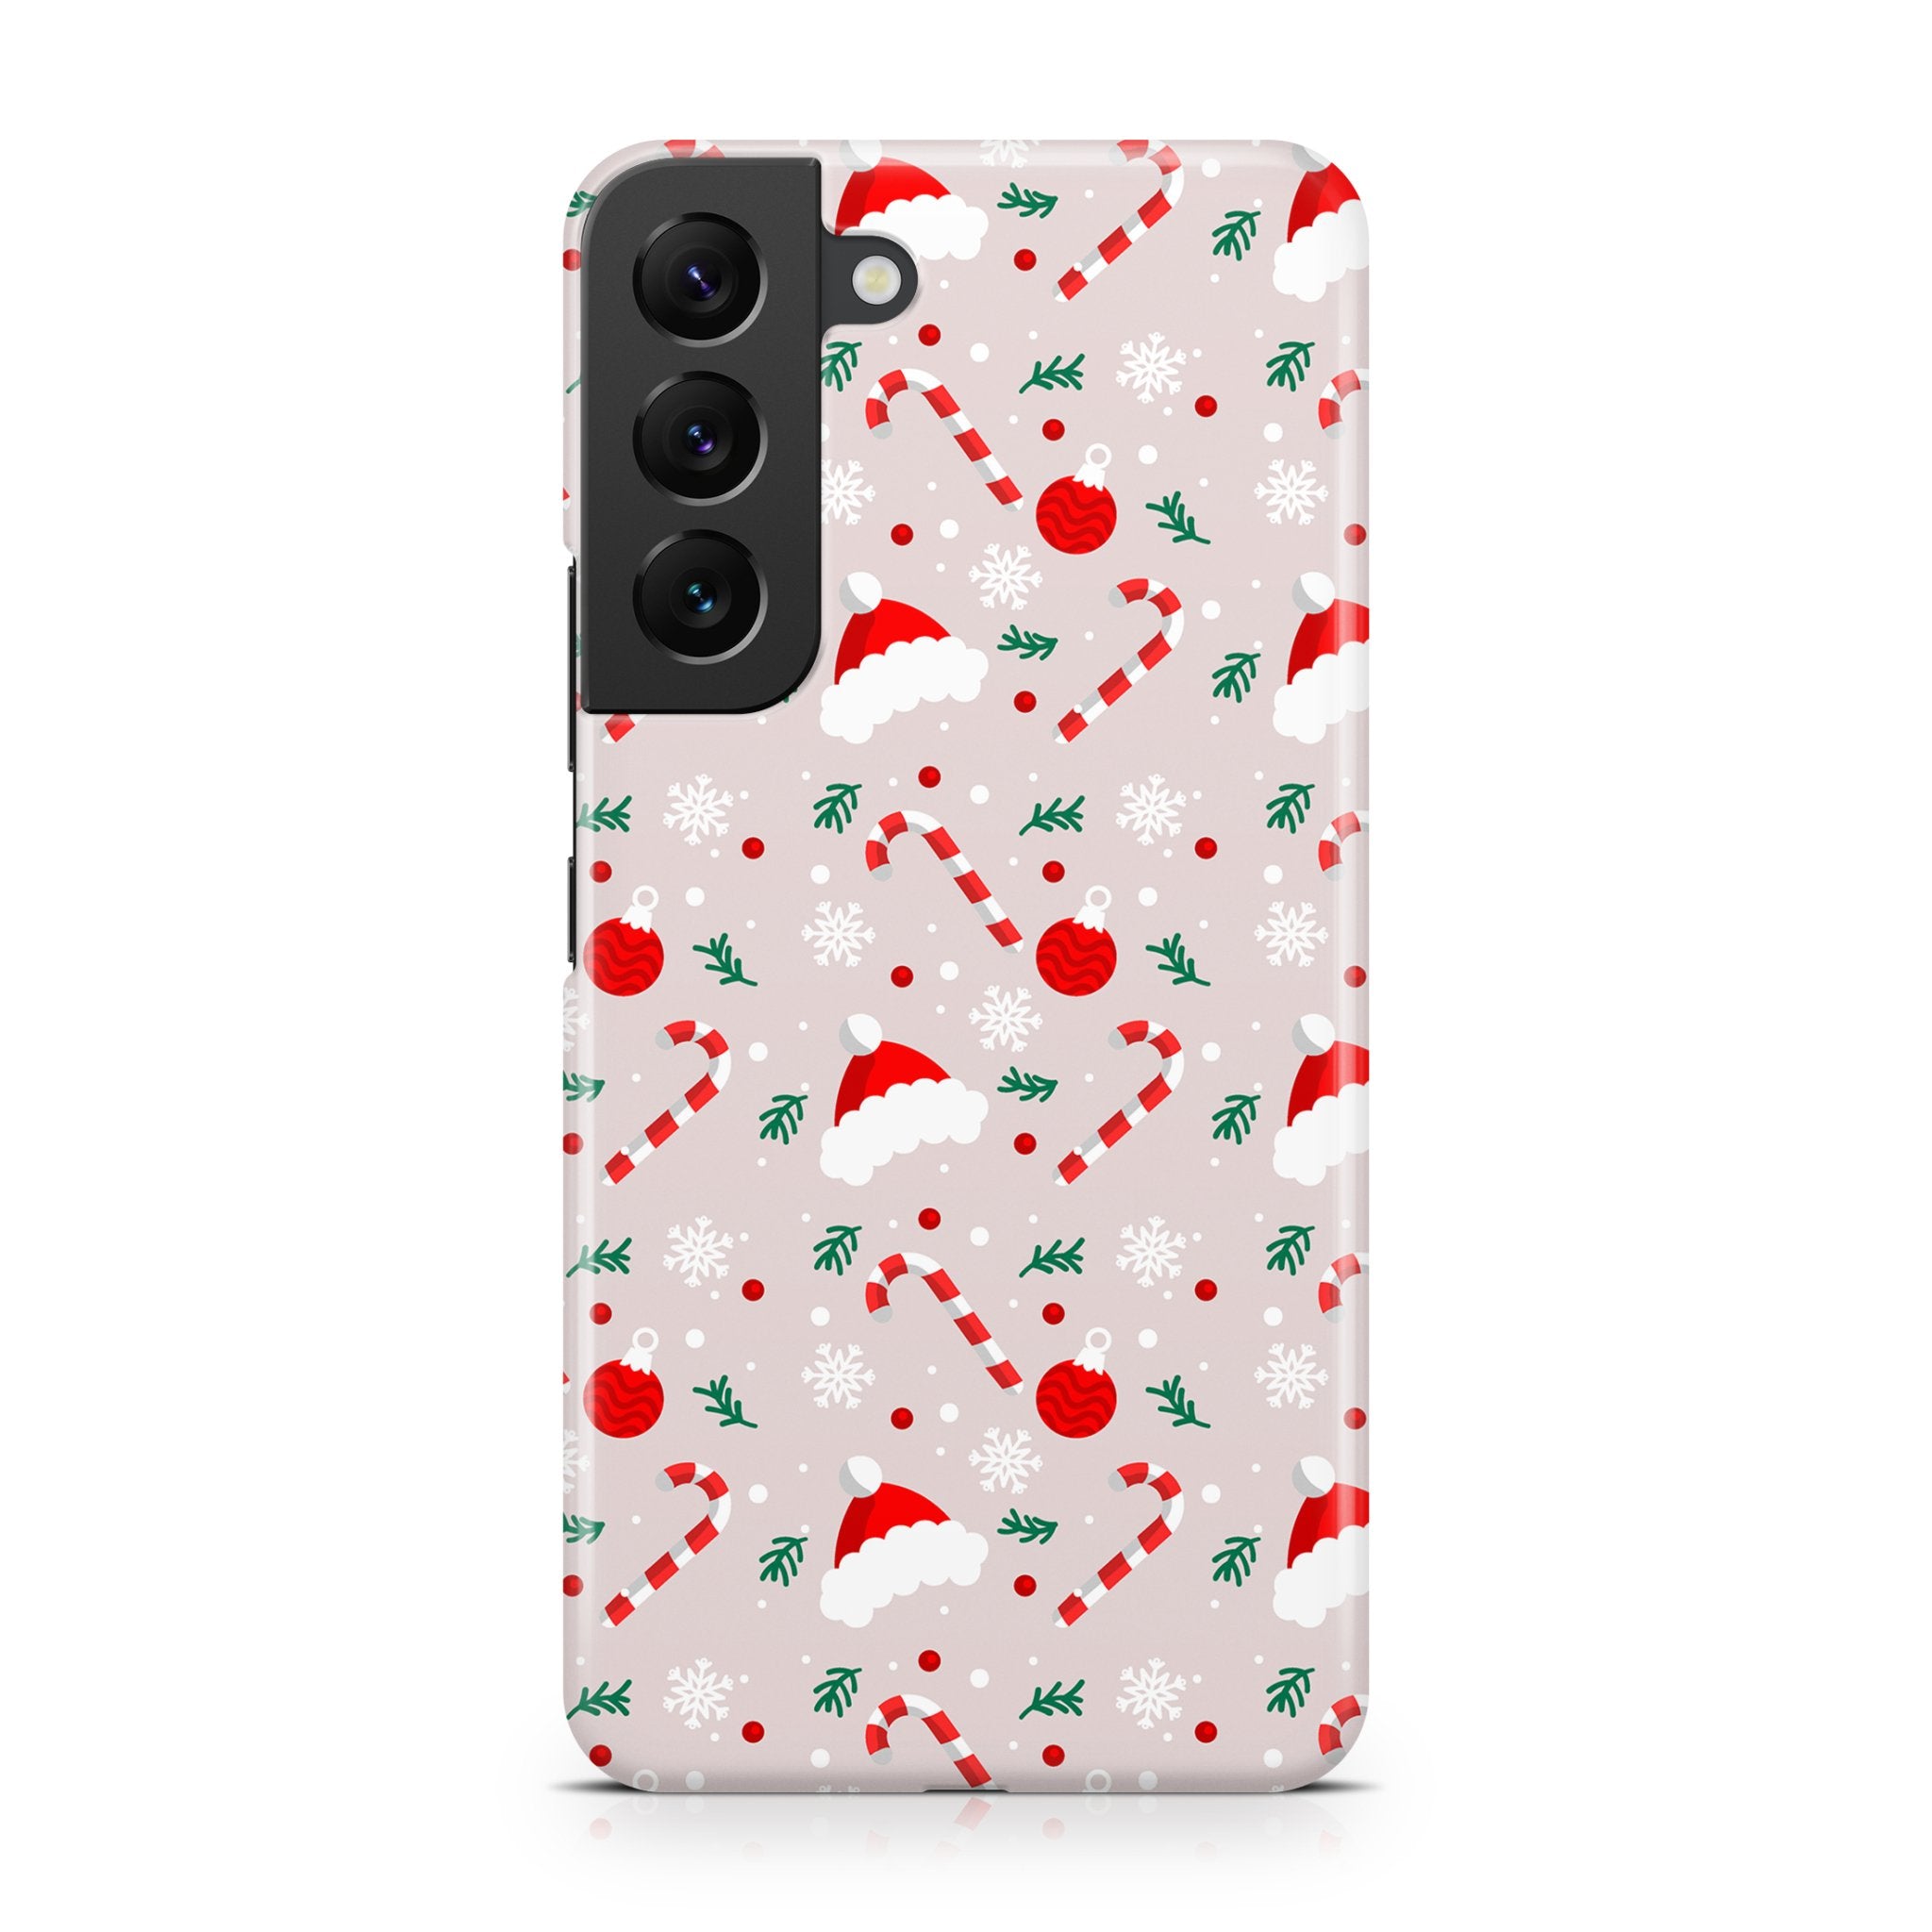 Candy Cane Christmas - Samsung phone case designs by CaseSwagger